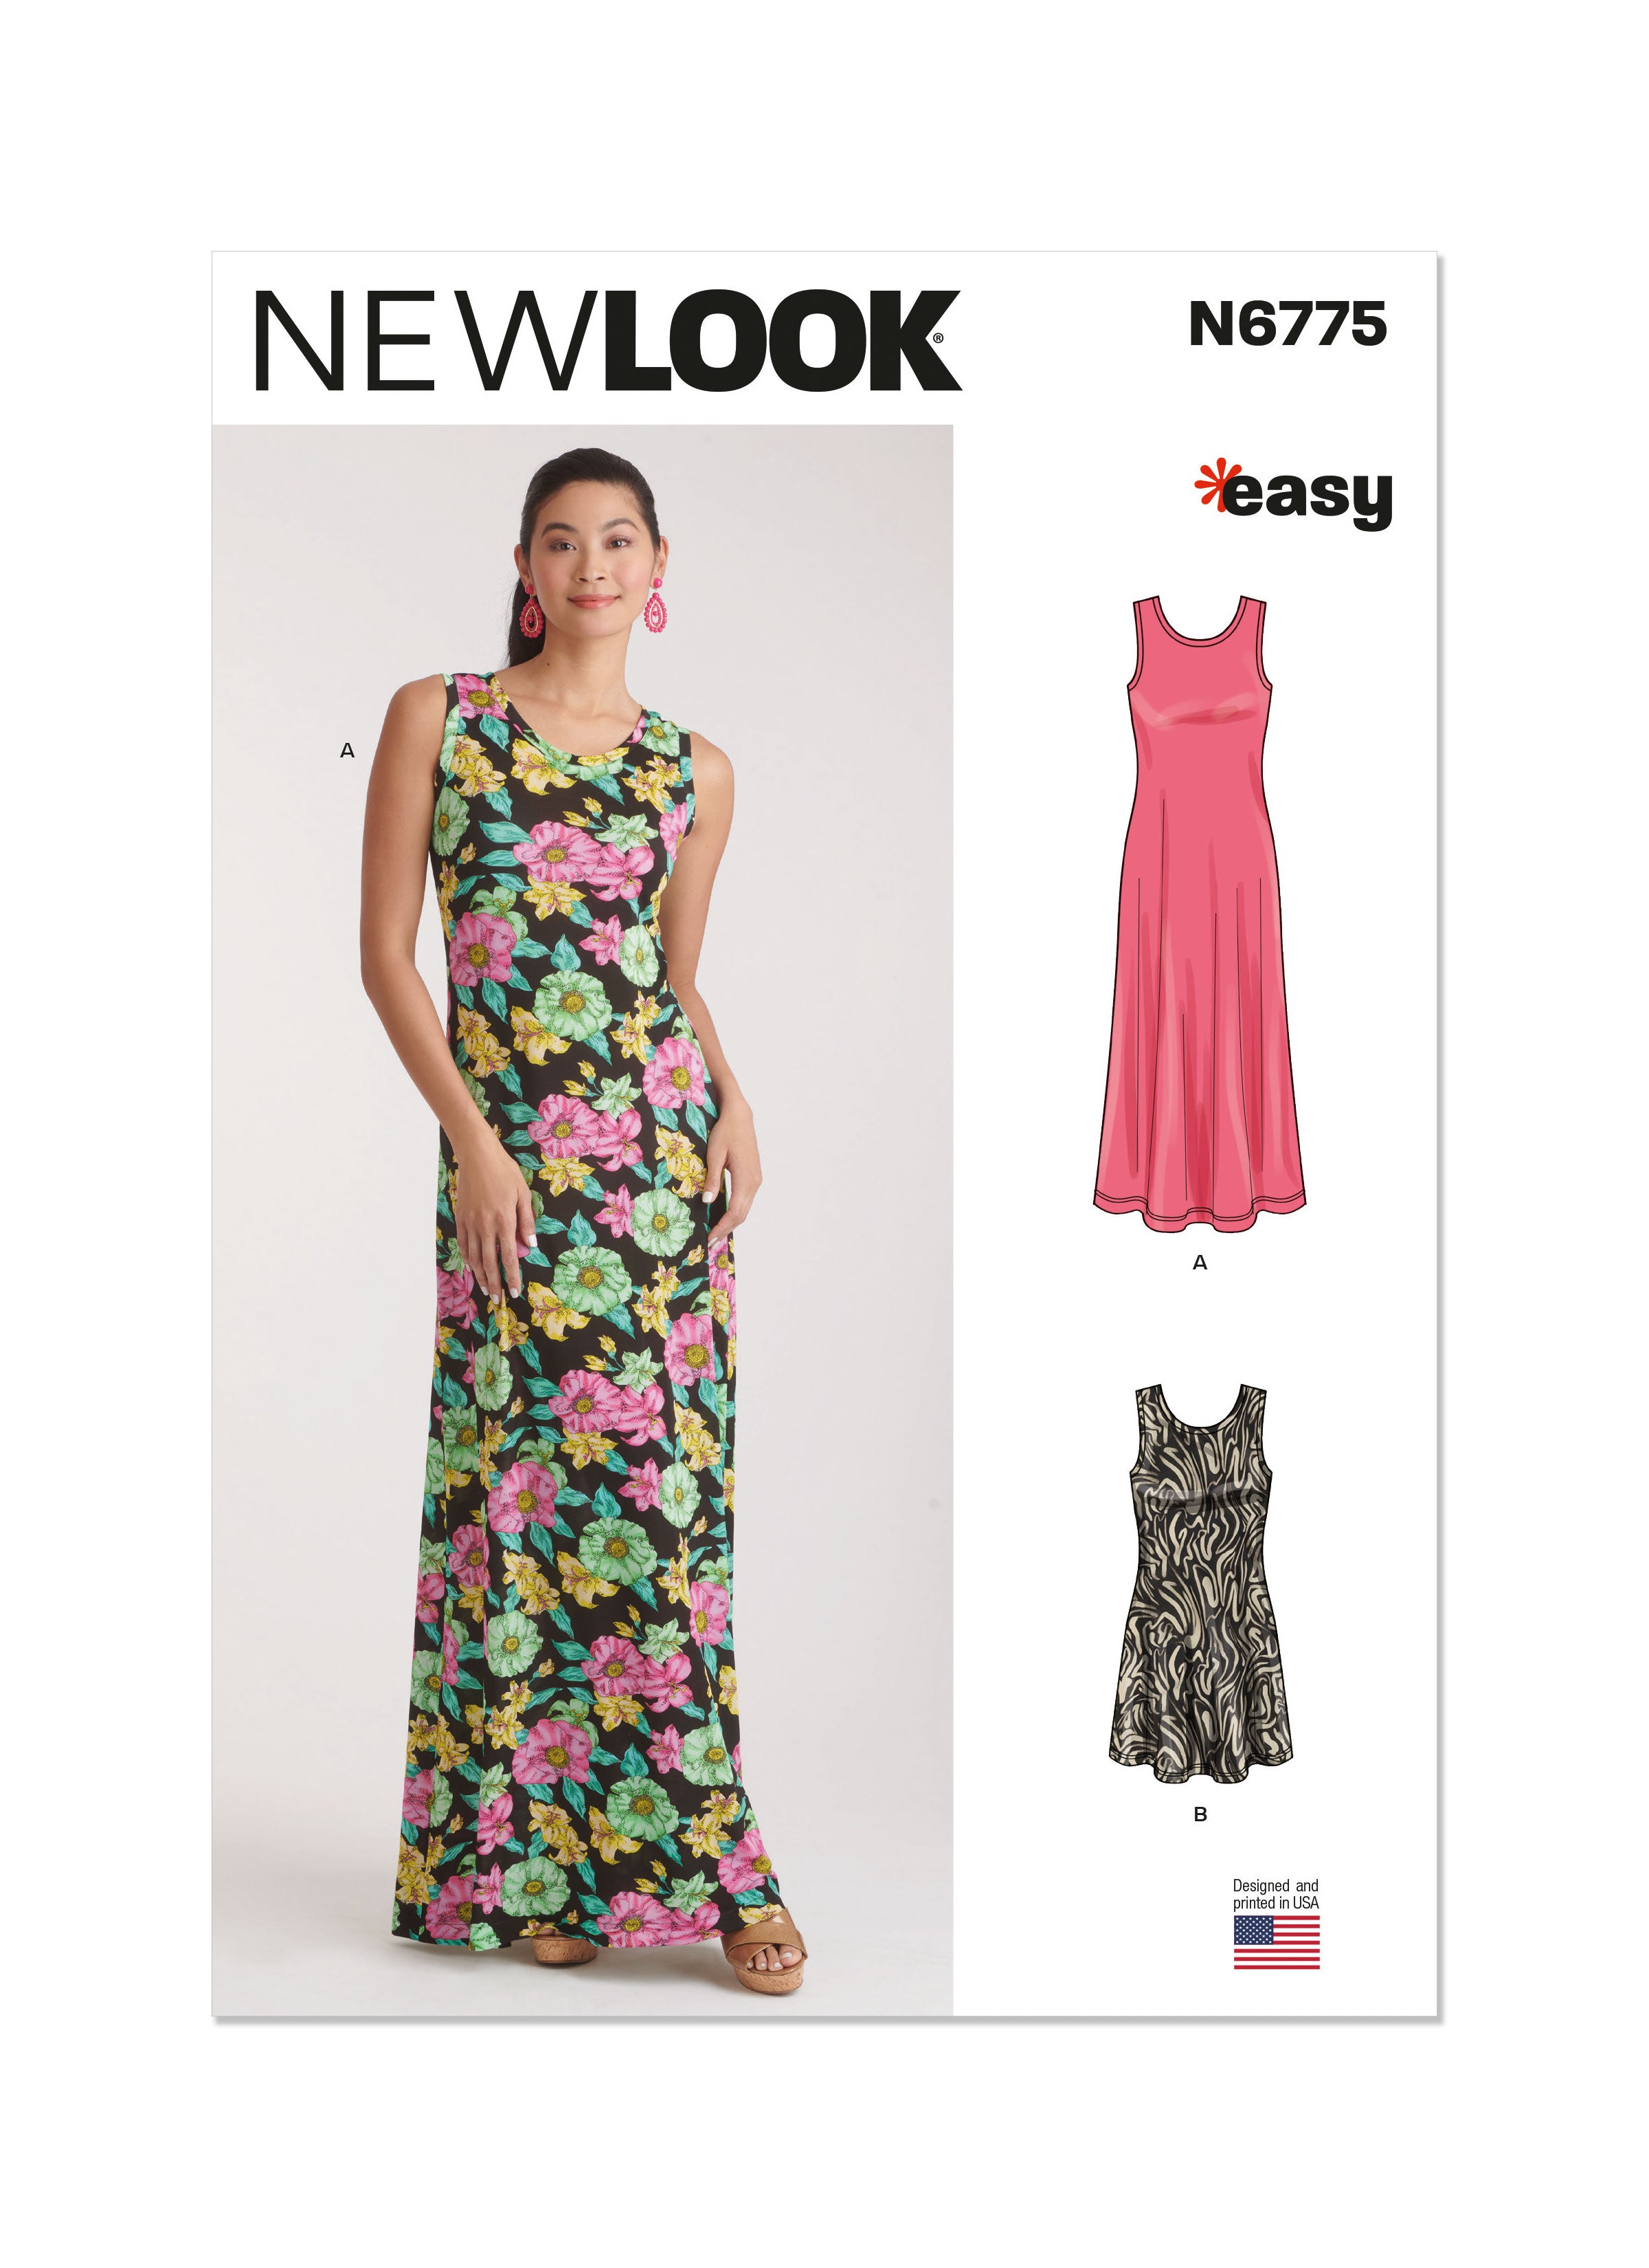 New Look sewing pattern 6775 Knit Dress in Two Lengths from Jaycotts Sewing Supplies